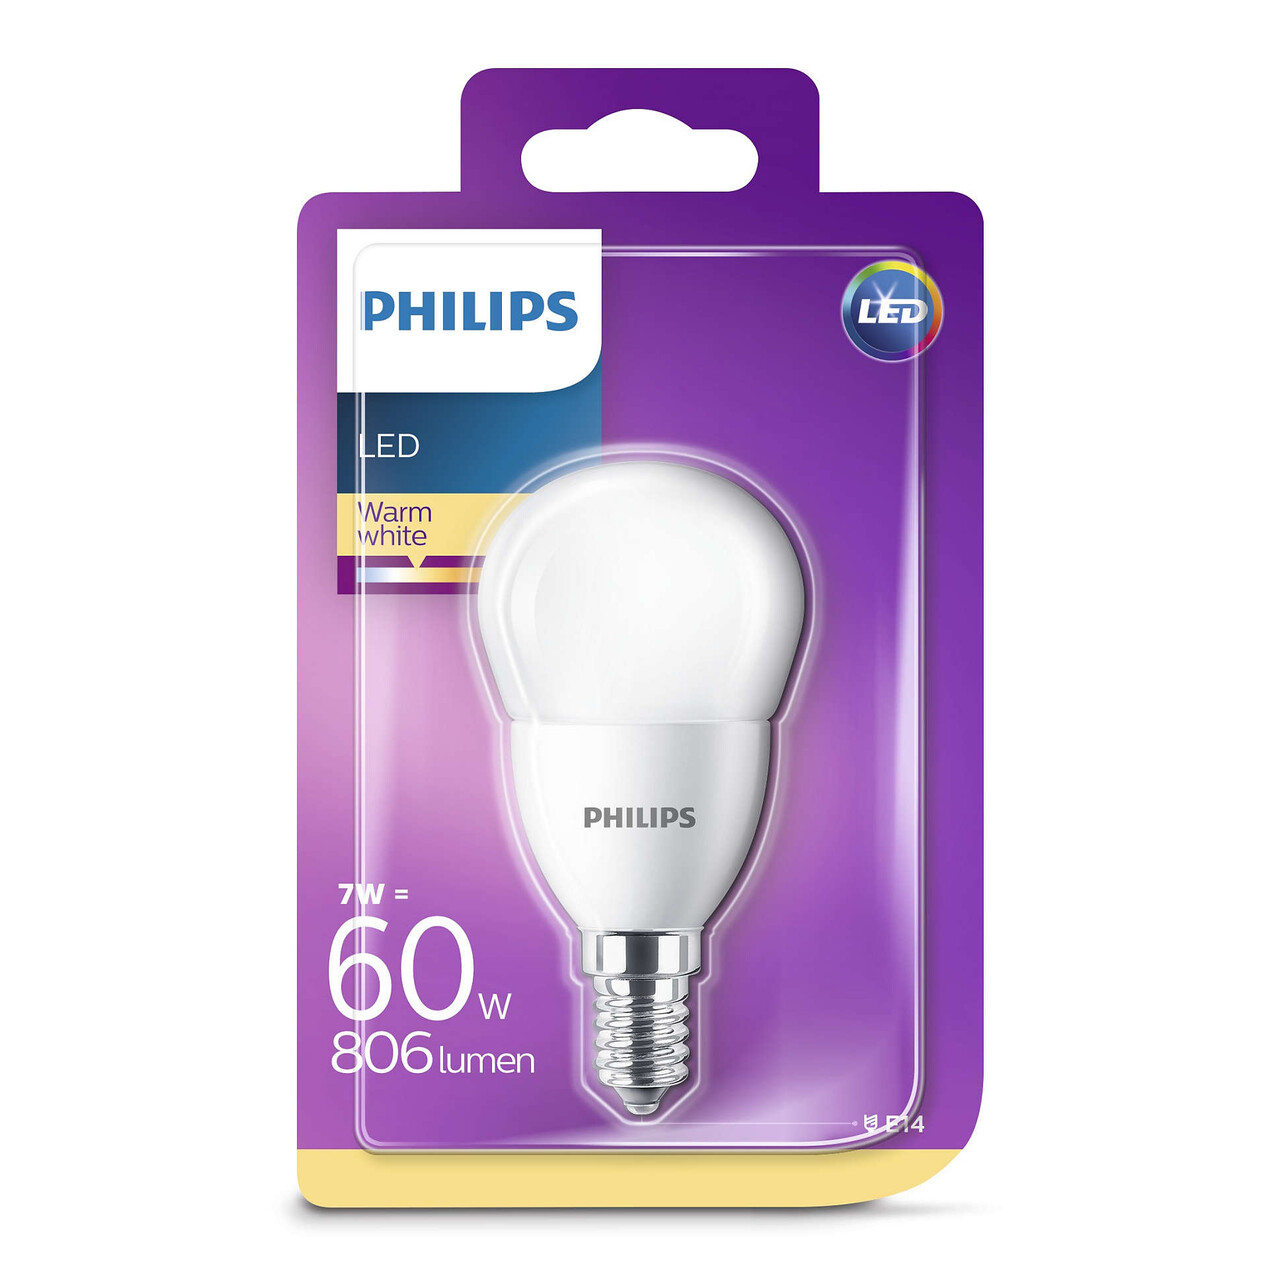 Perforatie Extreme armoede Liever Bulb LED 7W (806lm) E14 - Philips - Buy online